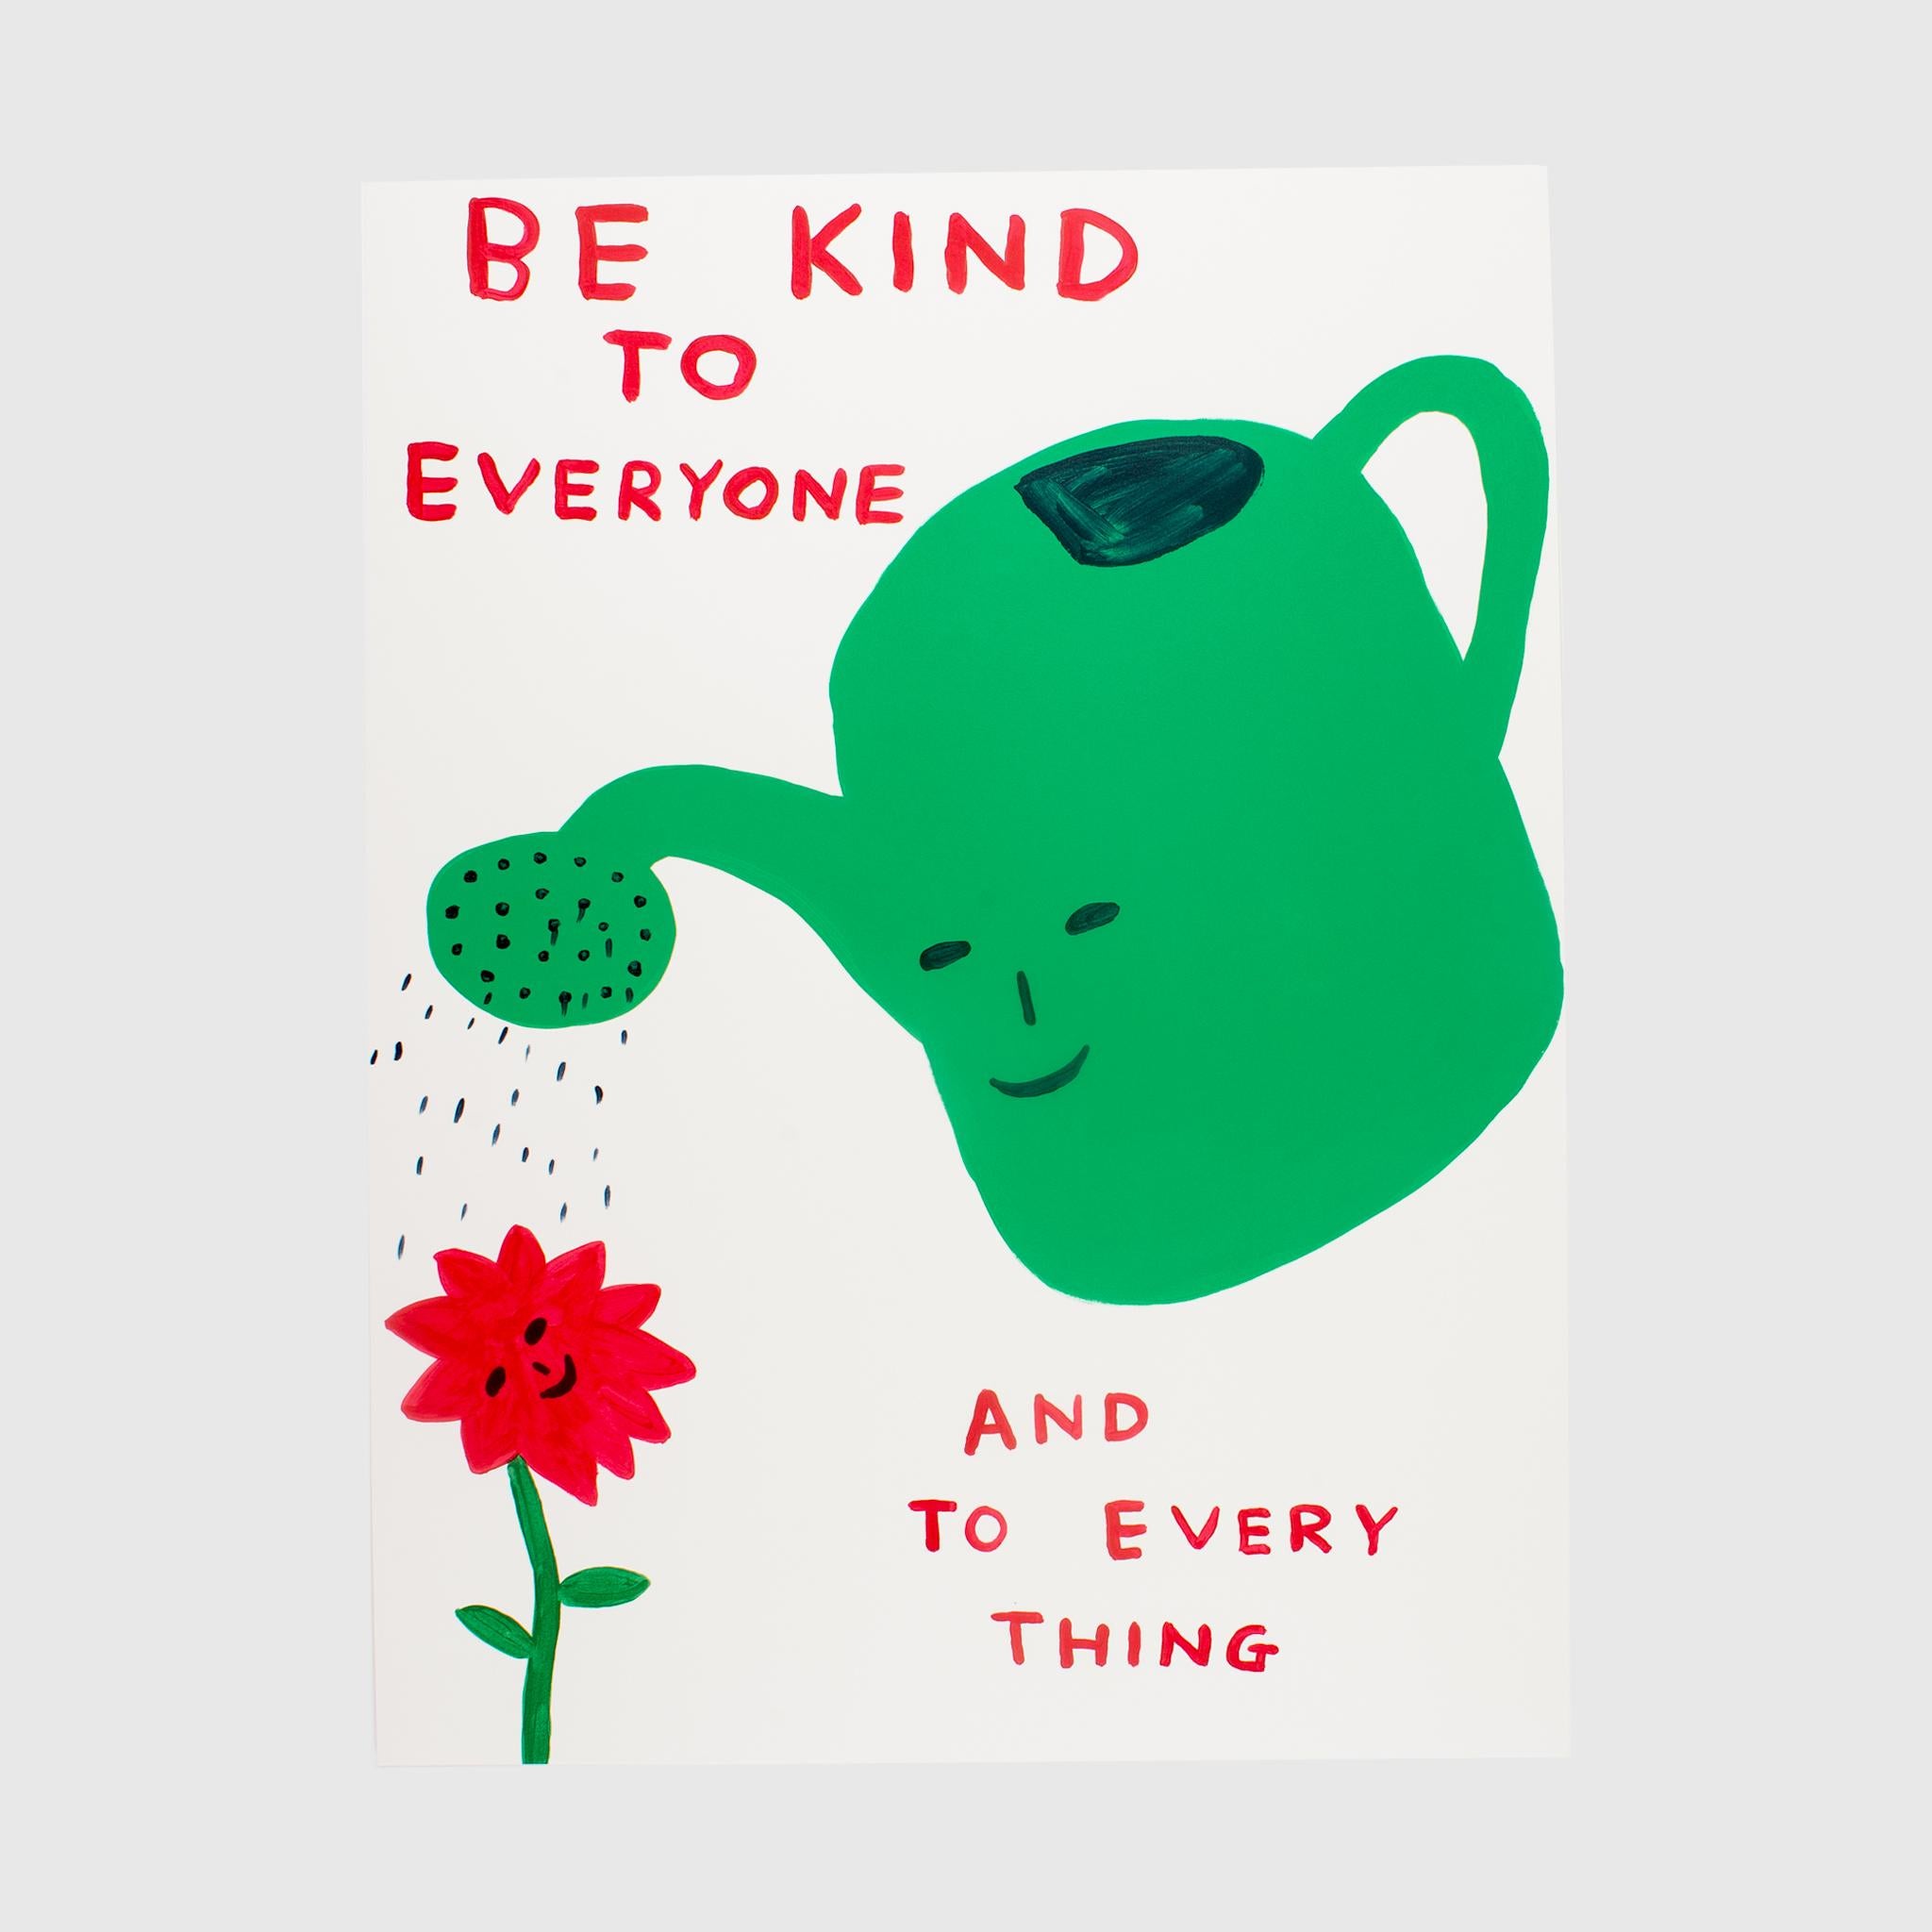 Be Kind To Everyone - Print by David Shrigley